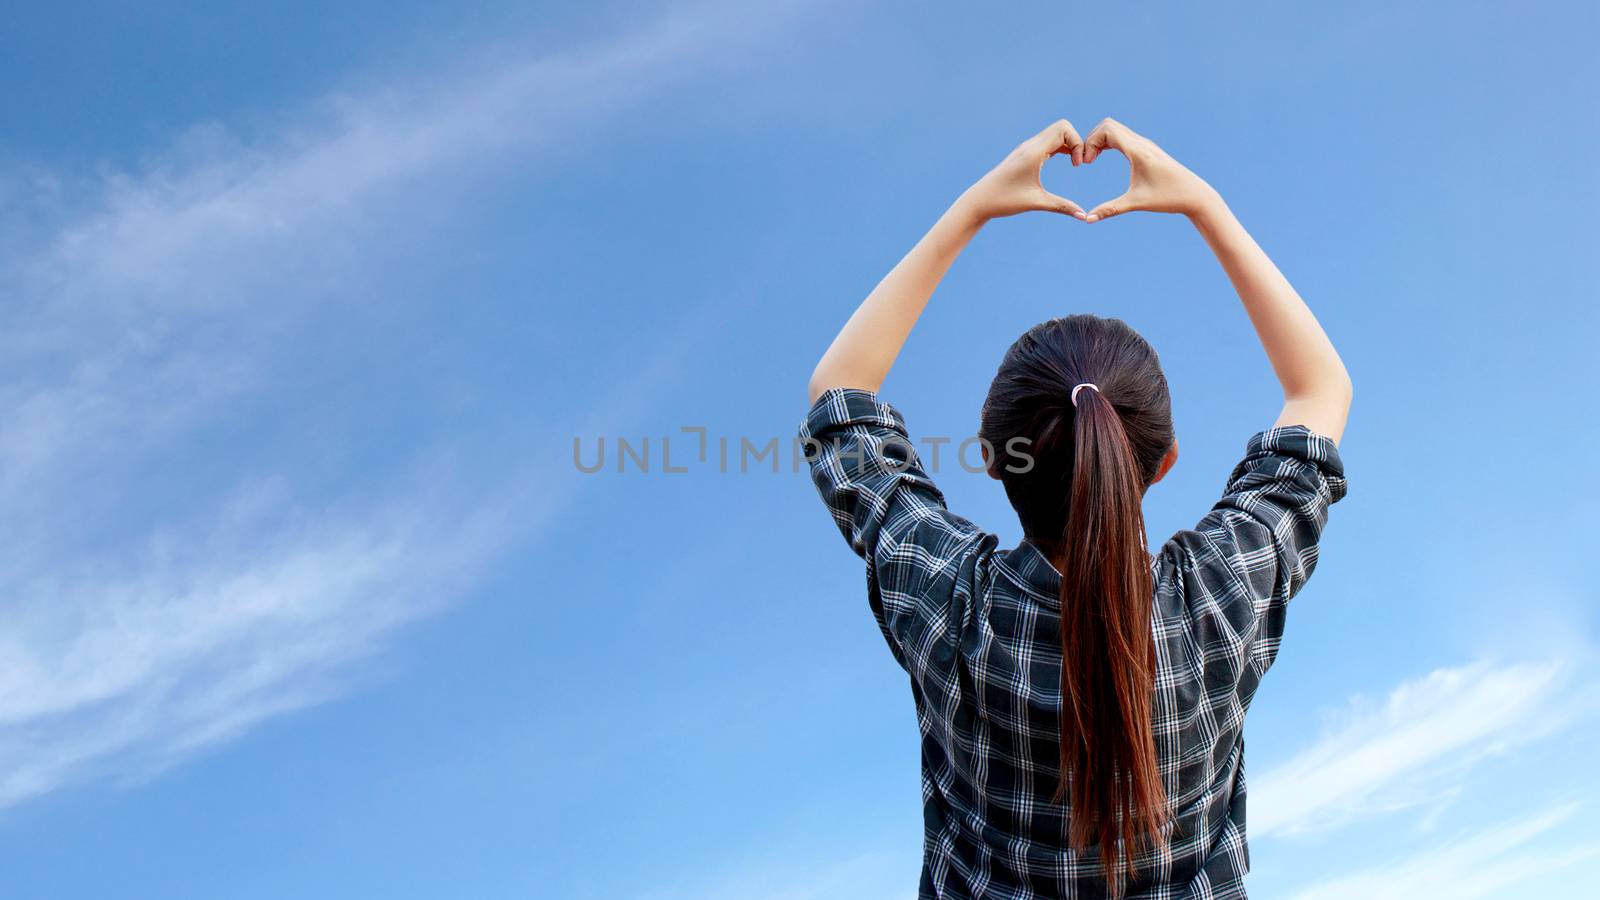 woman raise her hands to make heart shape in the air with blue sky at background